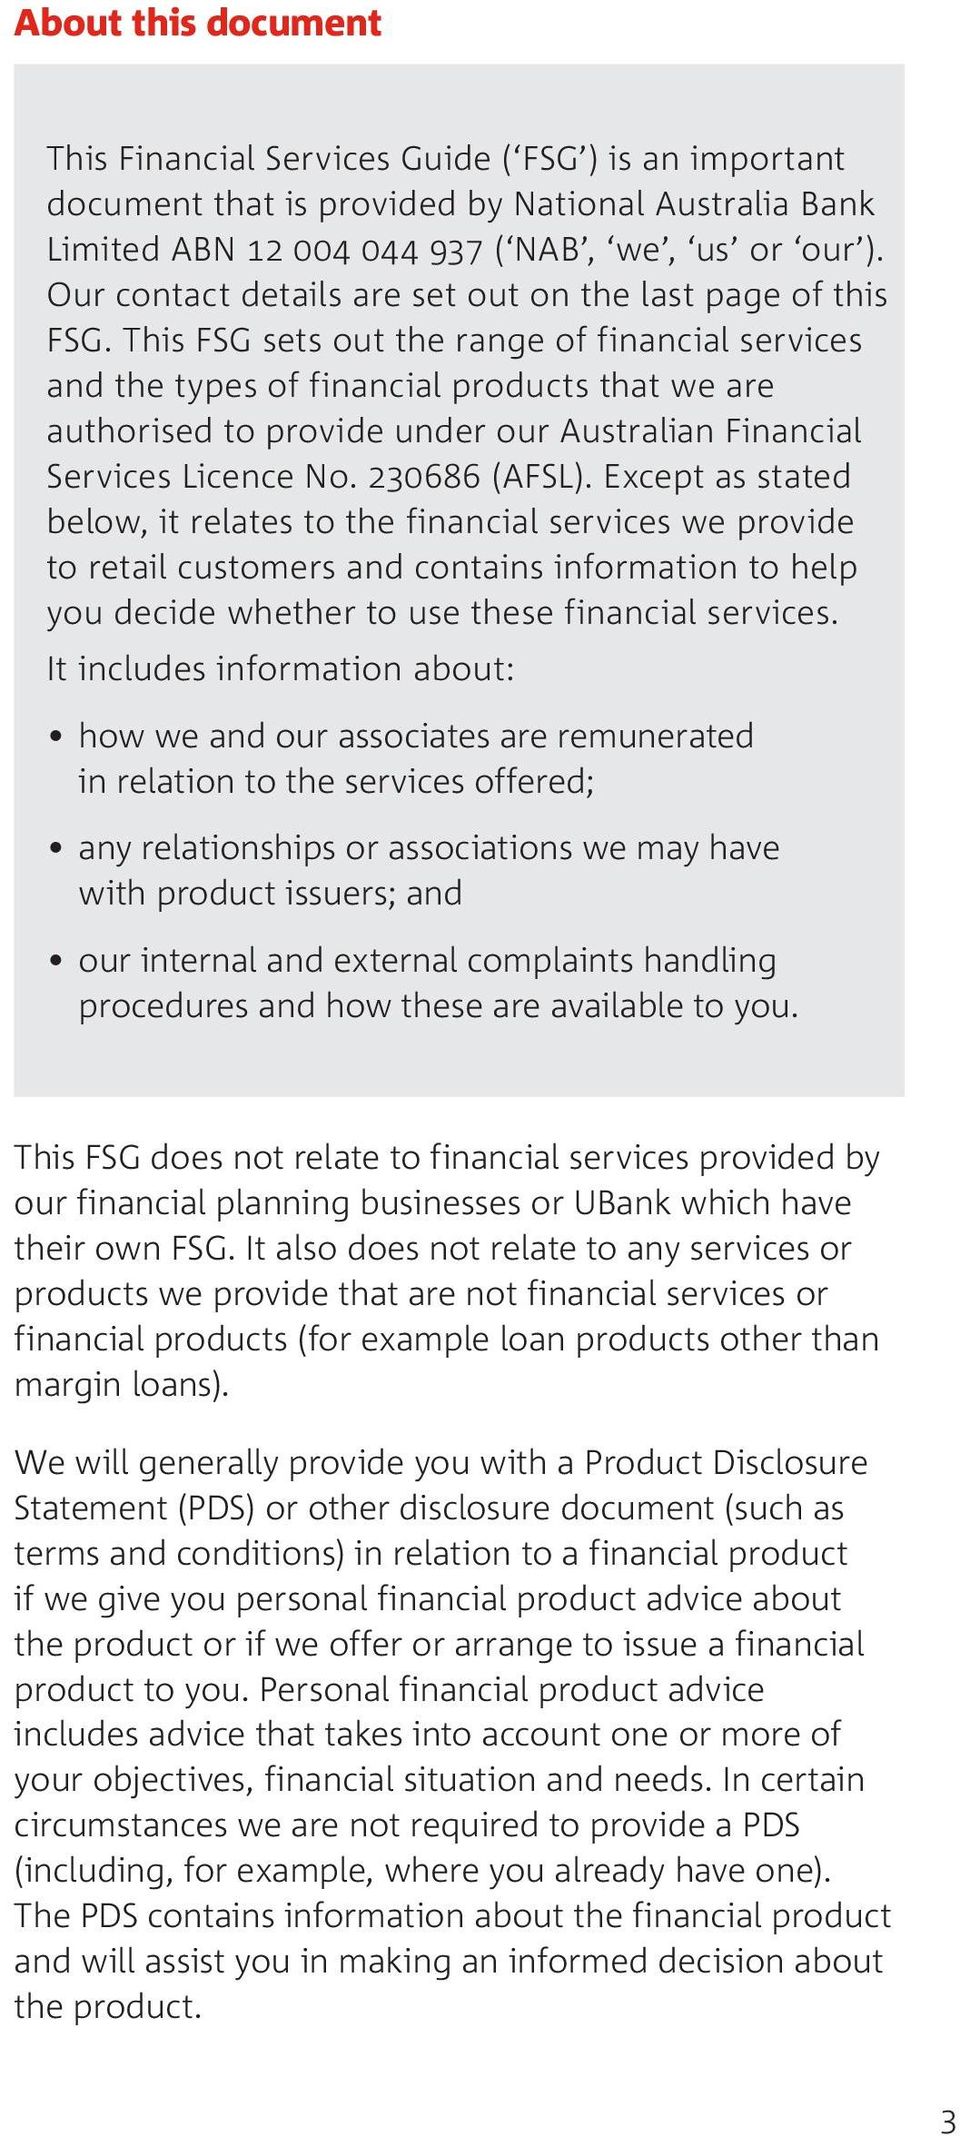 This FSG sets out the range of financial services and the types of financial products that we are authorised to provide under our Australian Financial Services Licence No. 230686 (AFSL).